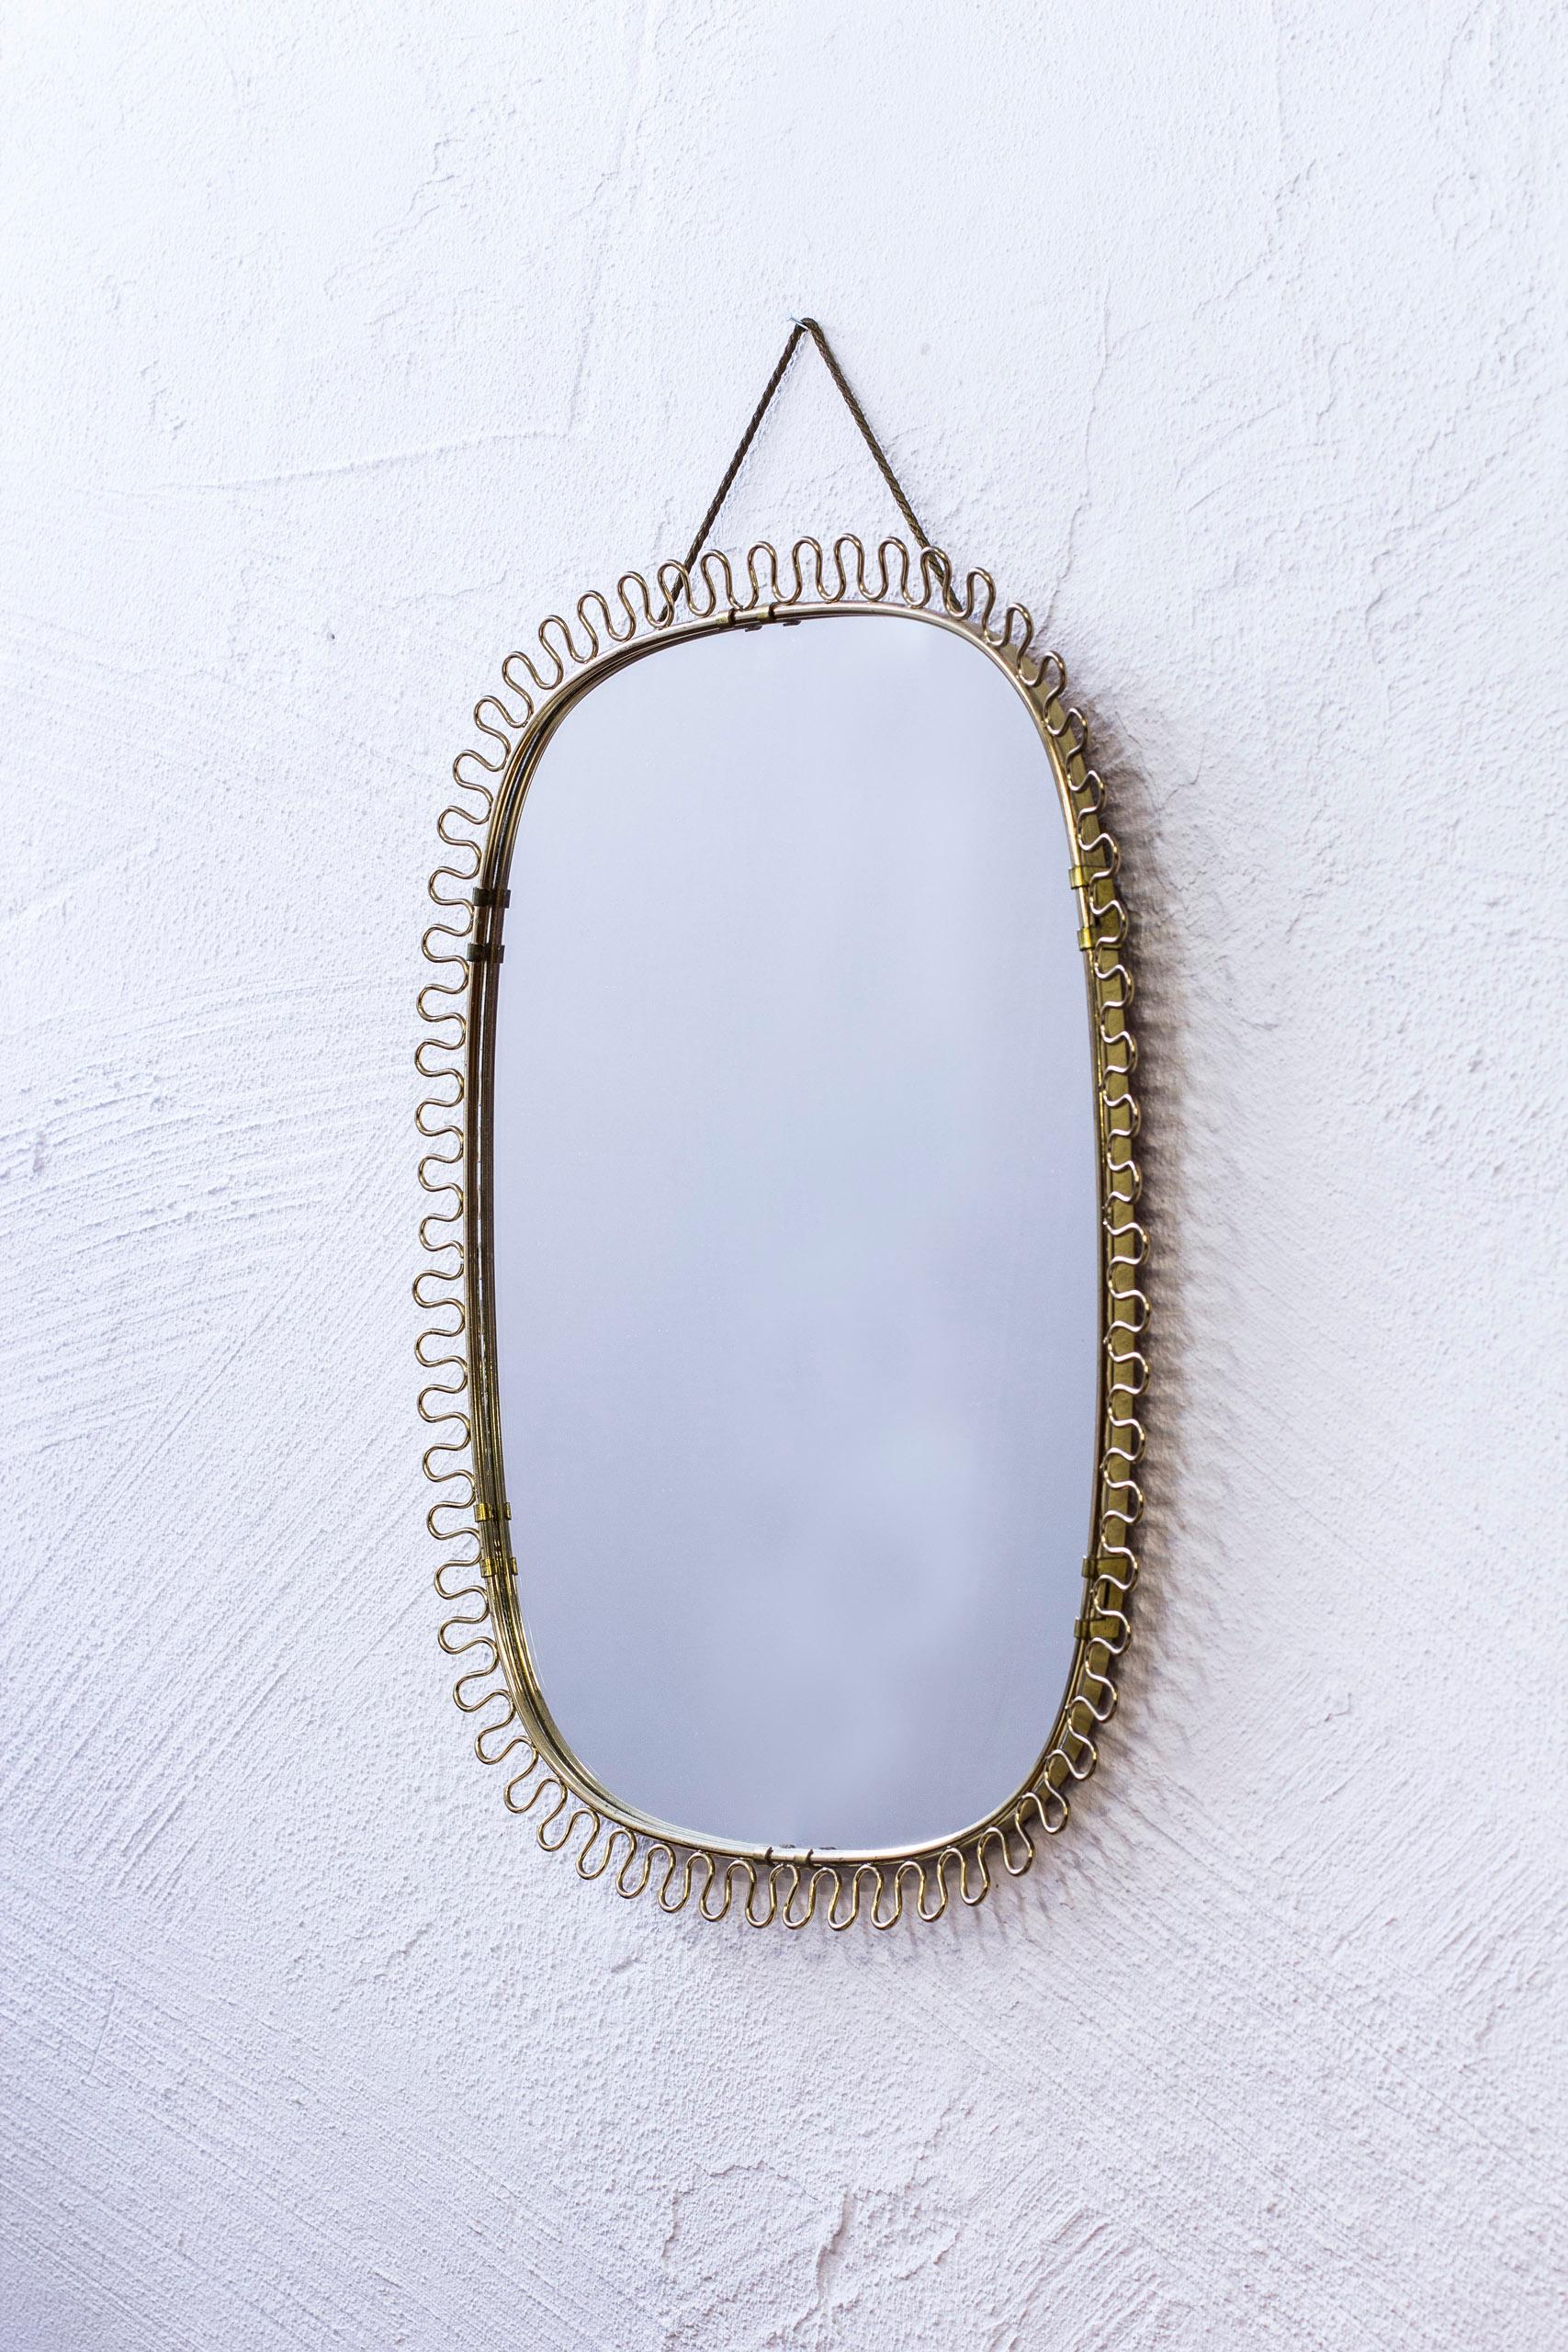 Wall mirror designed by Josef Frank. Produced by Firma Svenskt Tenn during the 1950s. Made from brass with mahogany back part. Excellent condition with very light age related patina and wear.
      